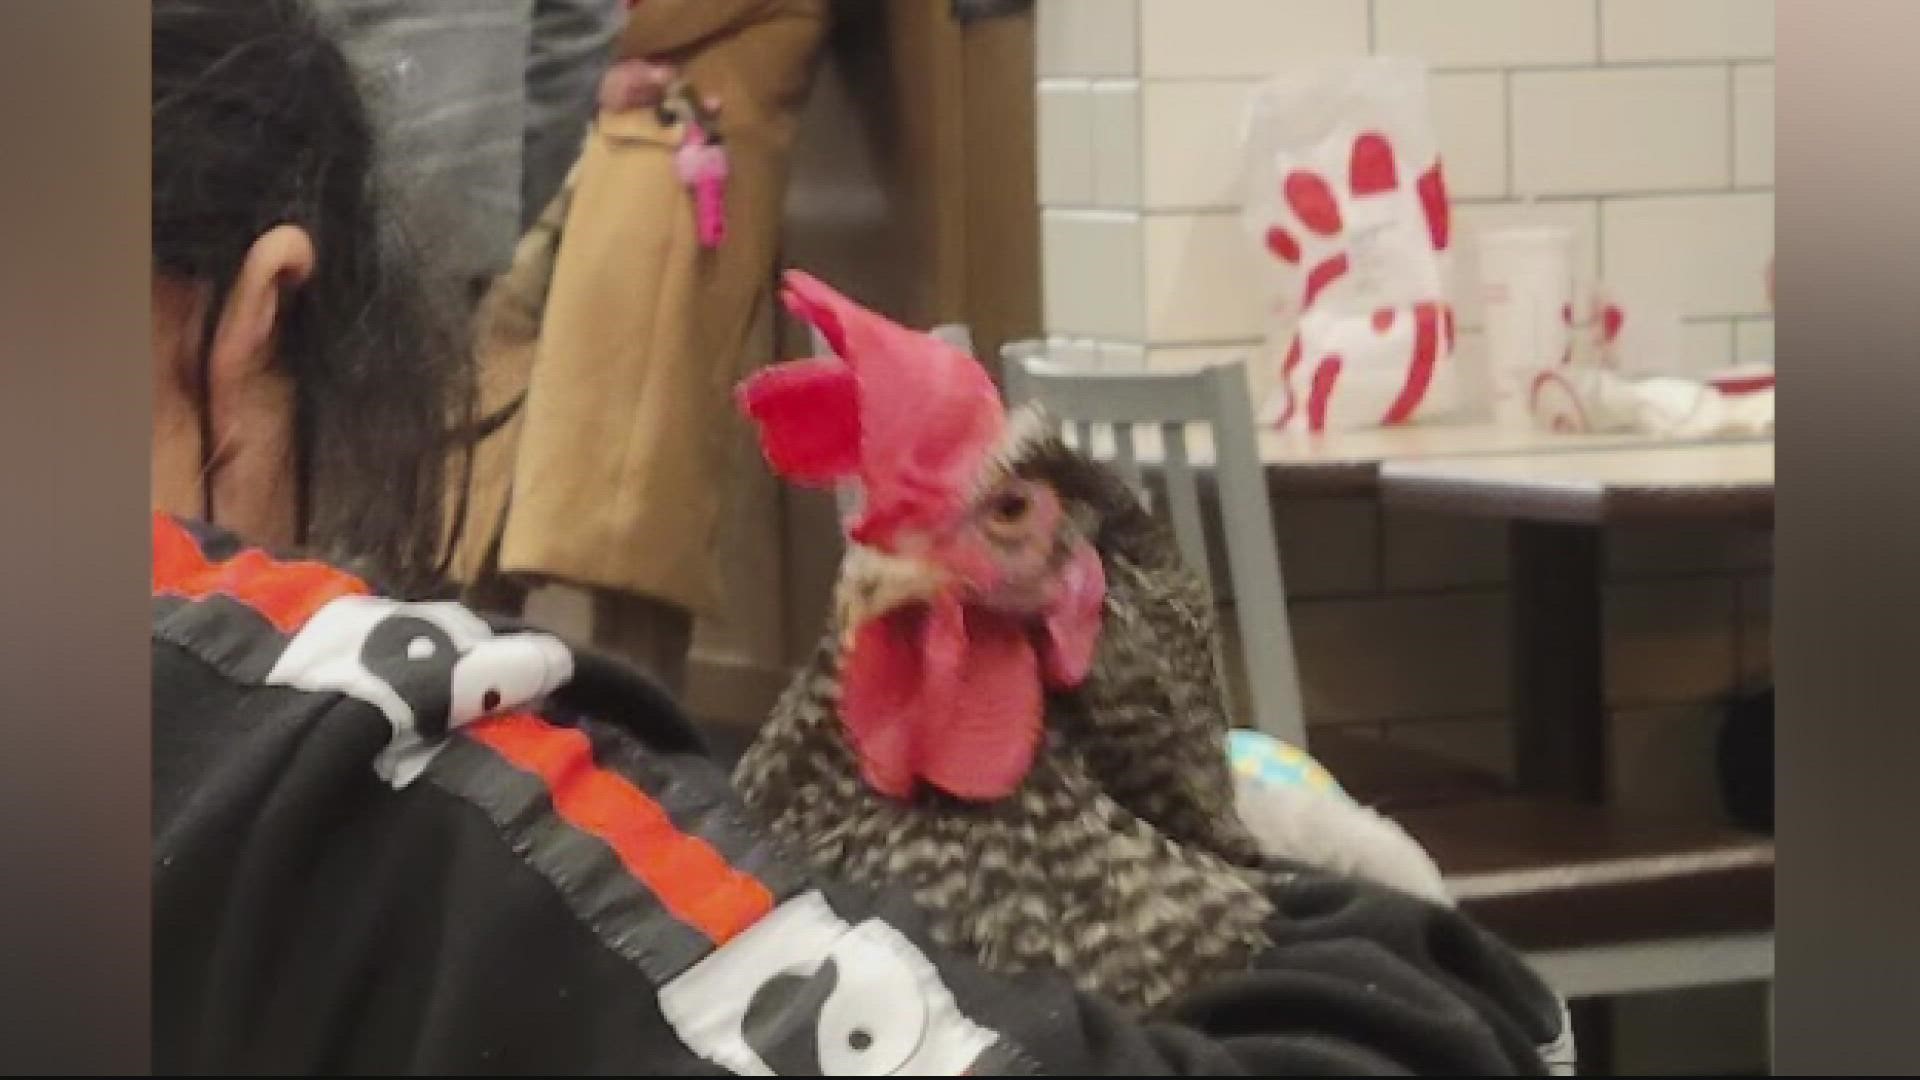 This "emotional support rooster" is going to need some emotional support of its own!